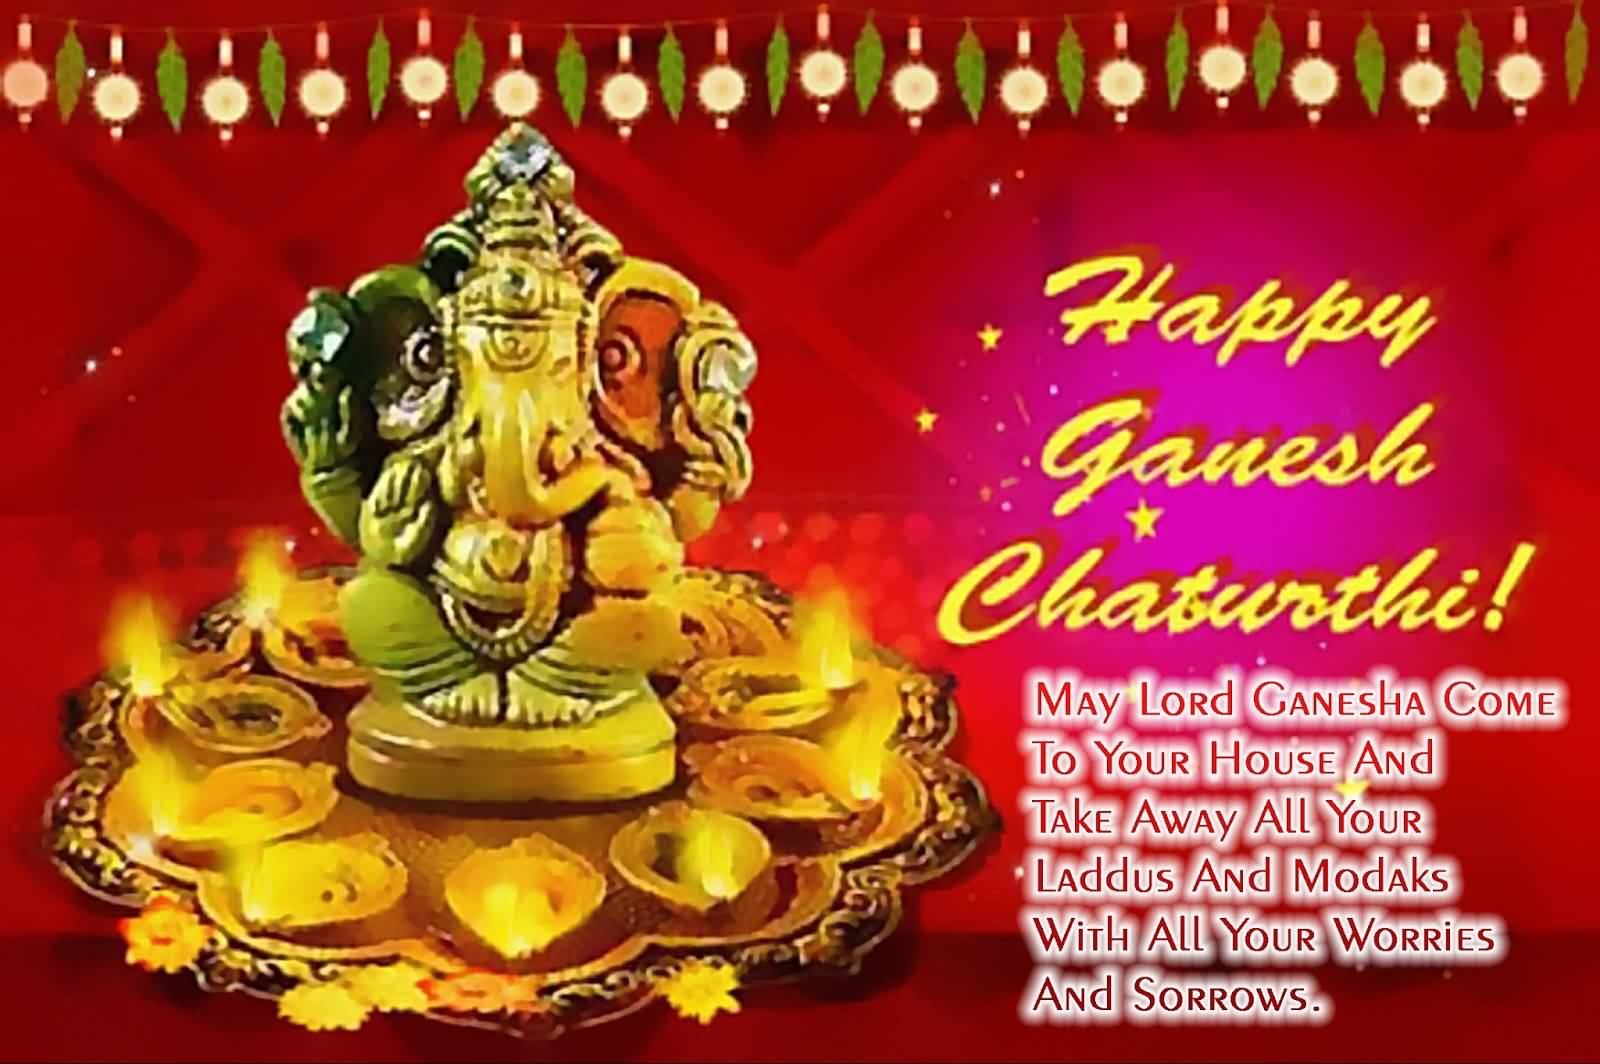 Happy Ganesh Chaturthi May Lord Ganesha Come To Your House And Take Away All Your Laddus And Modaks With All Your Worries And Sorrow